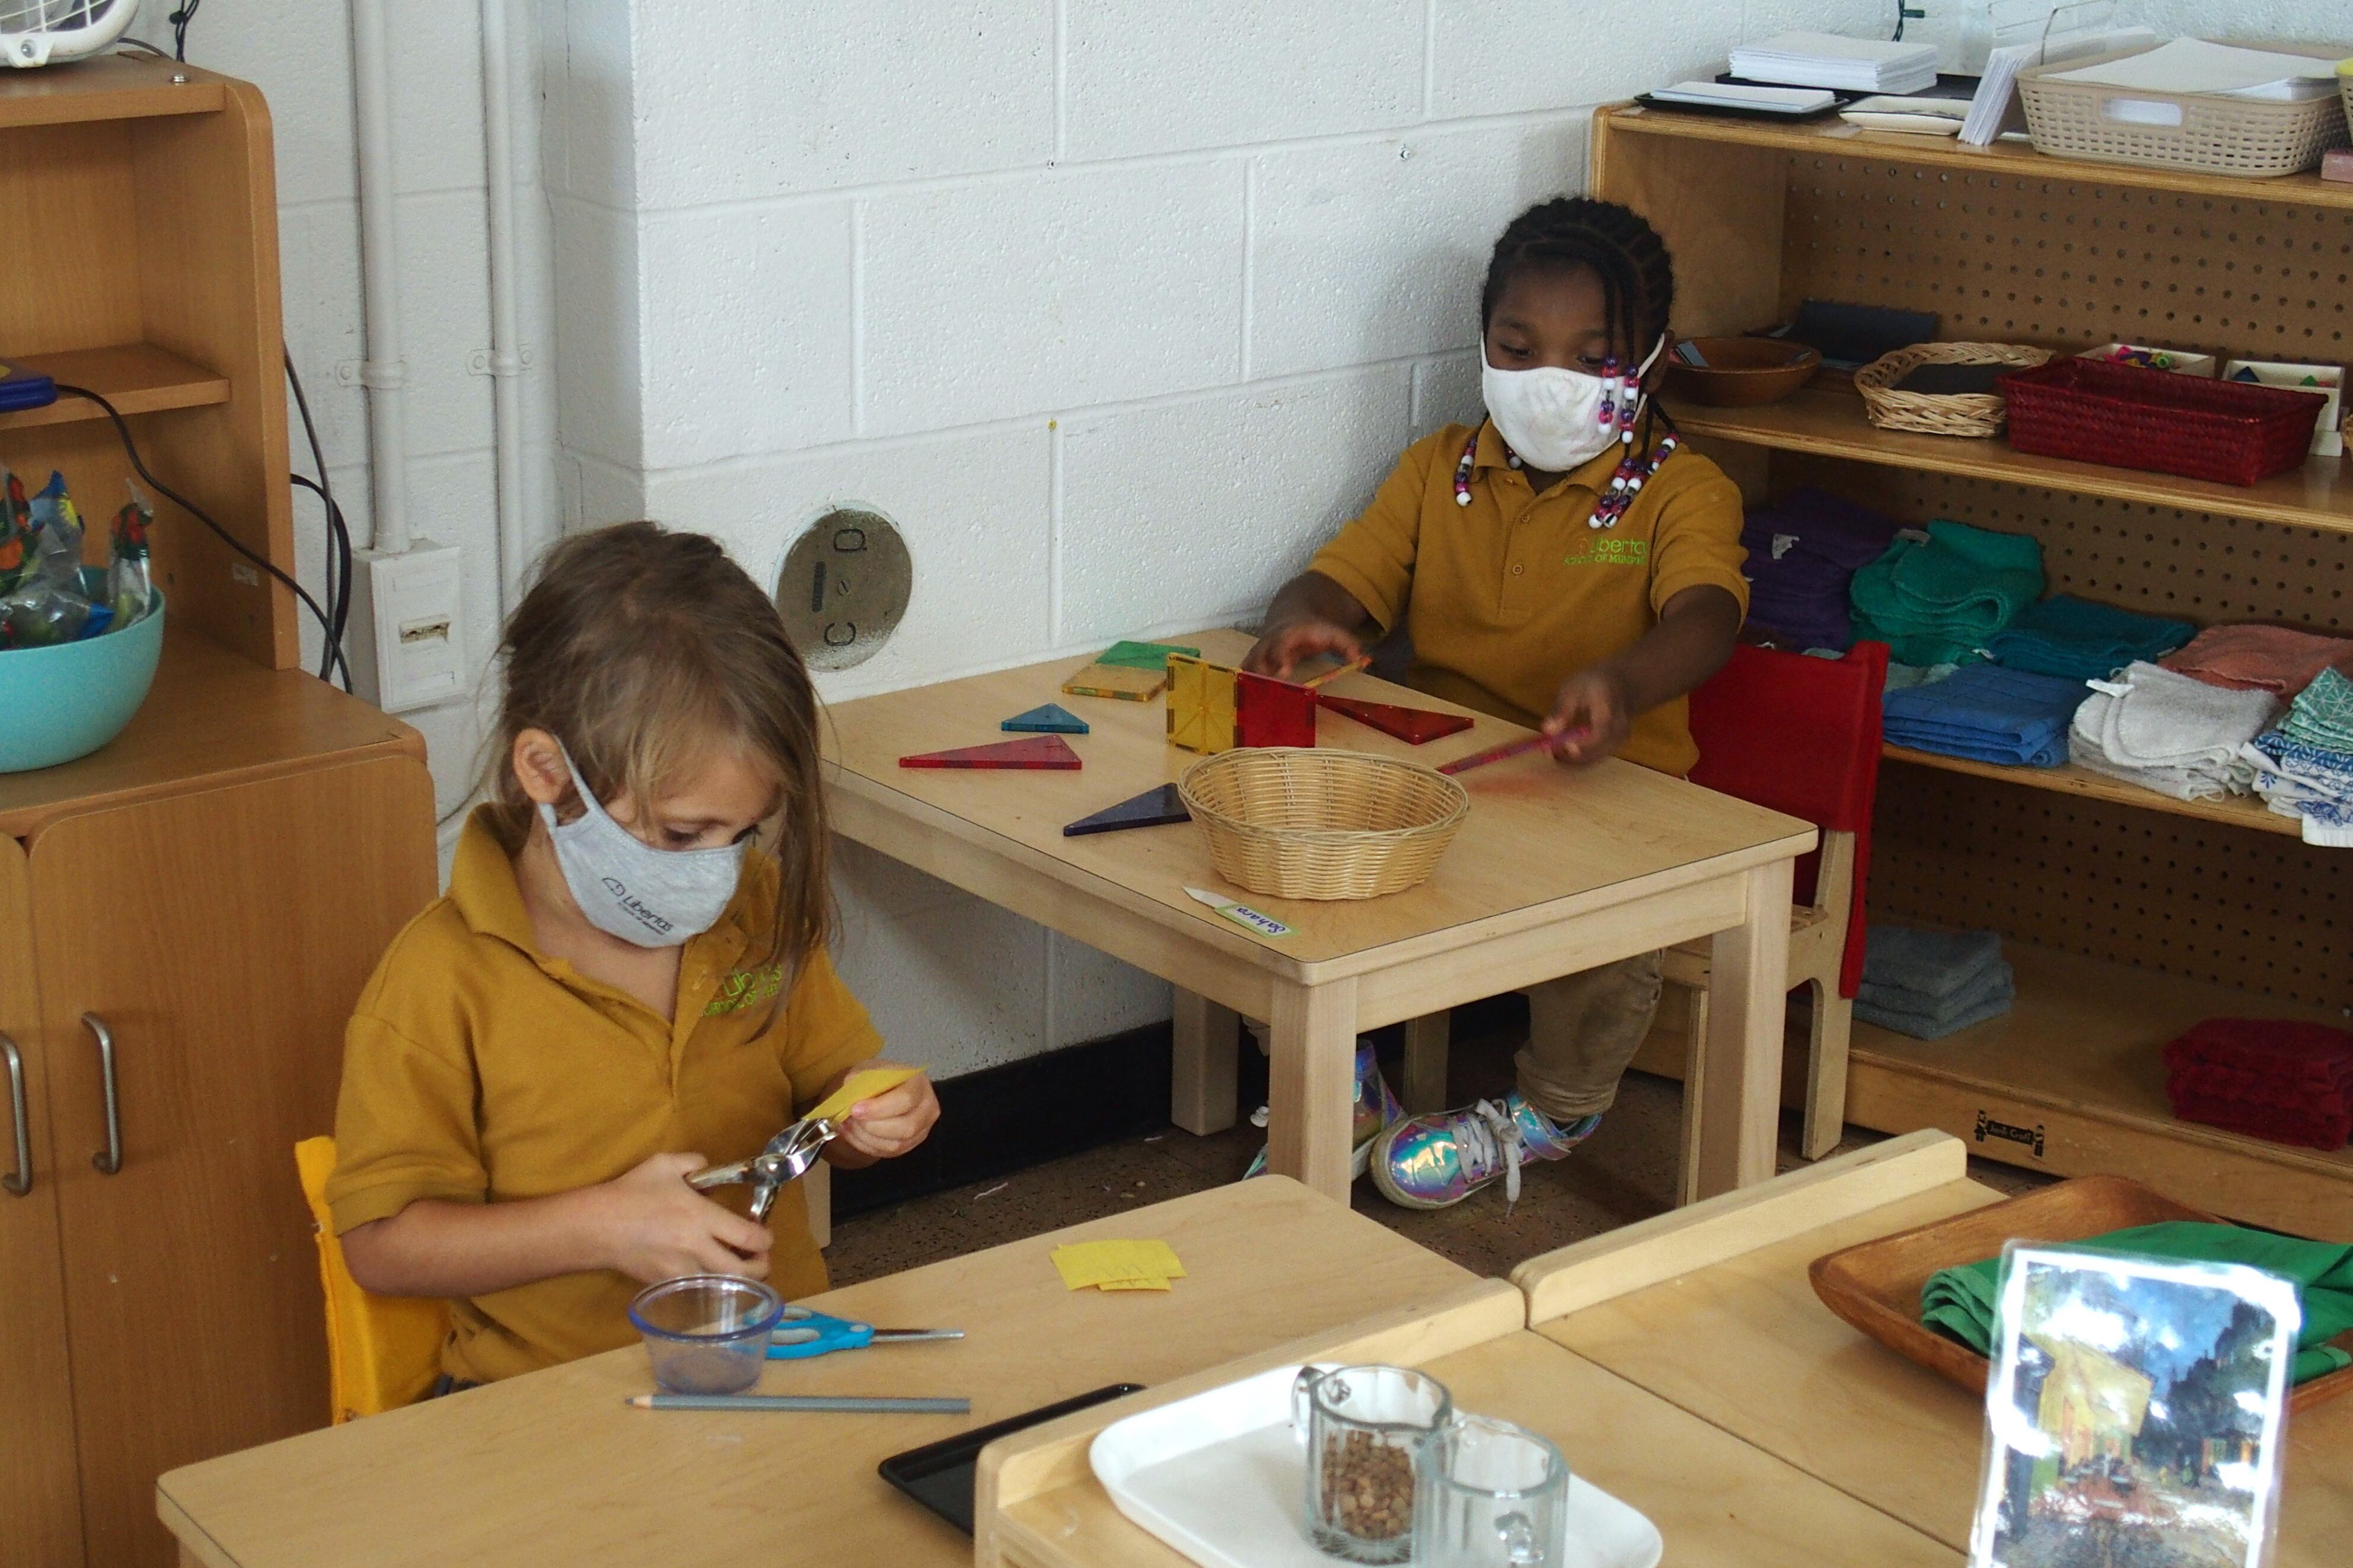 Elementary school students work at their desks with masks on